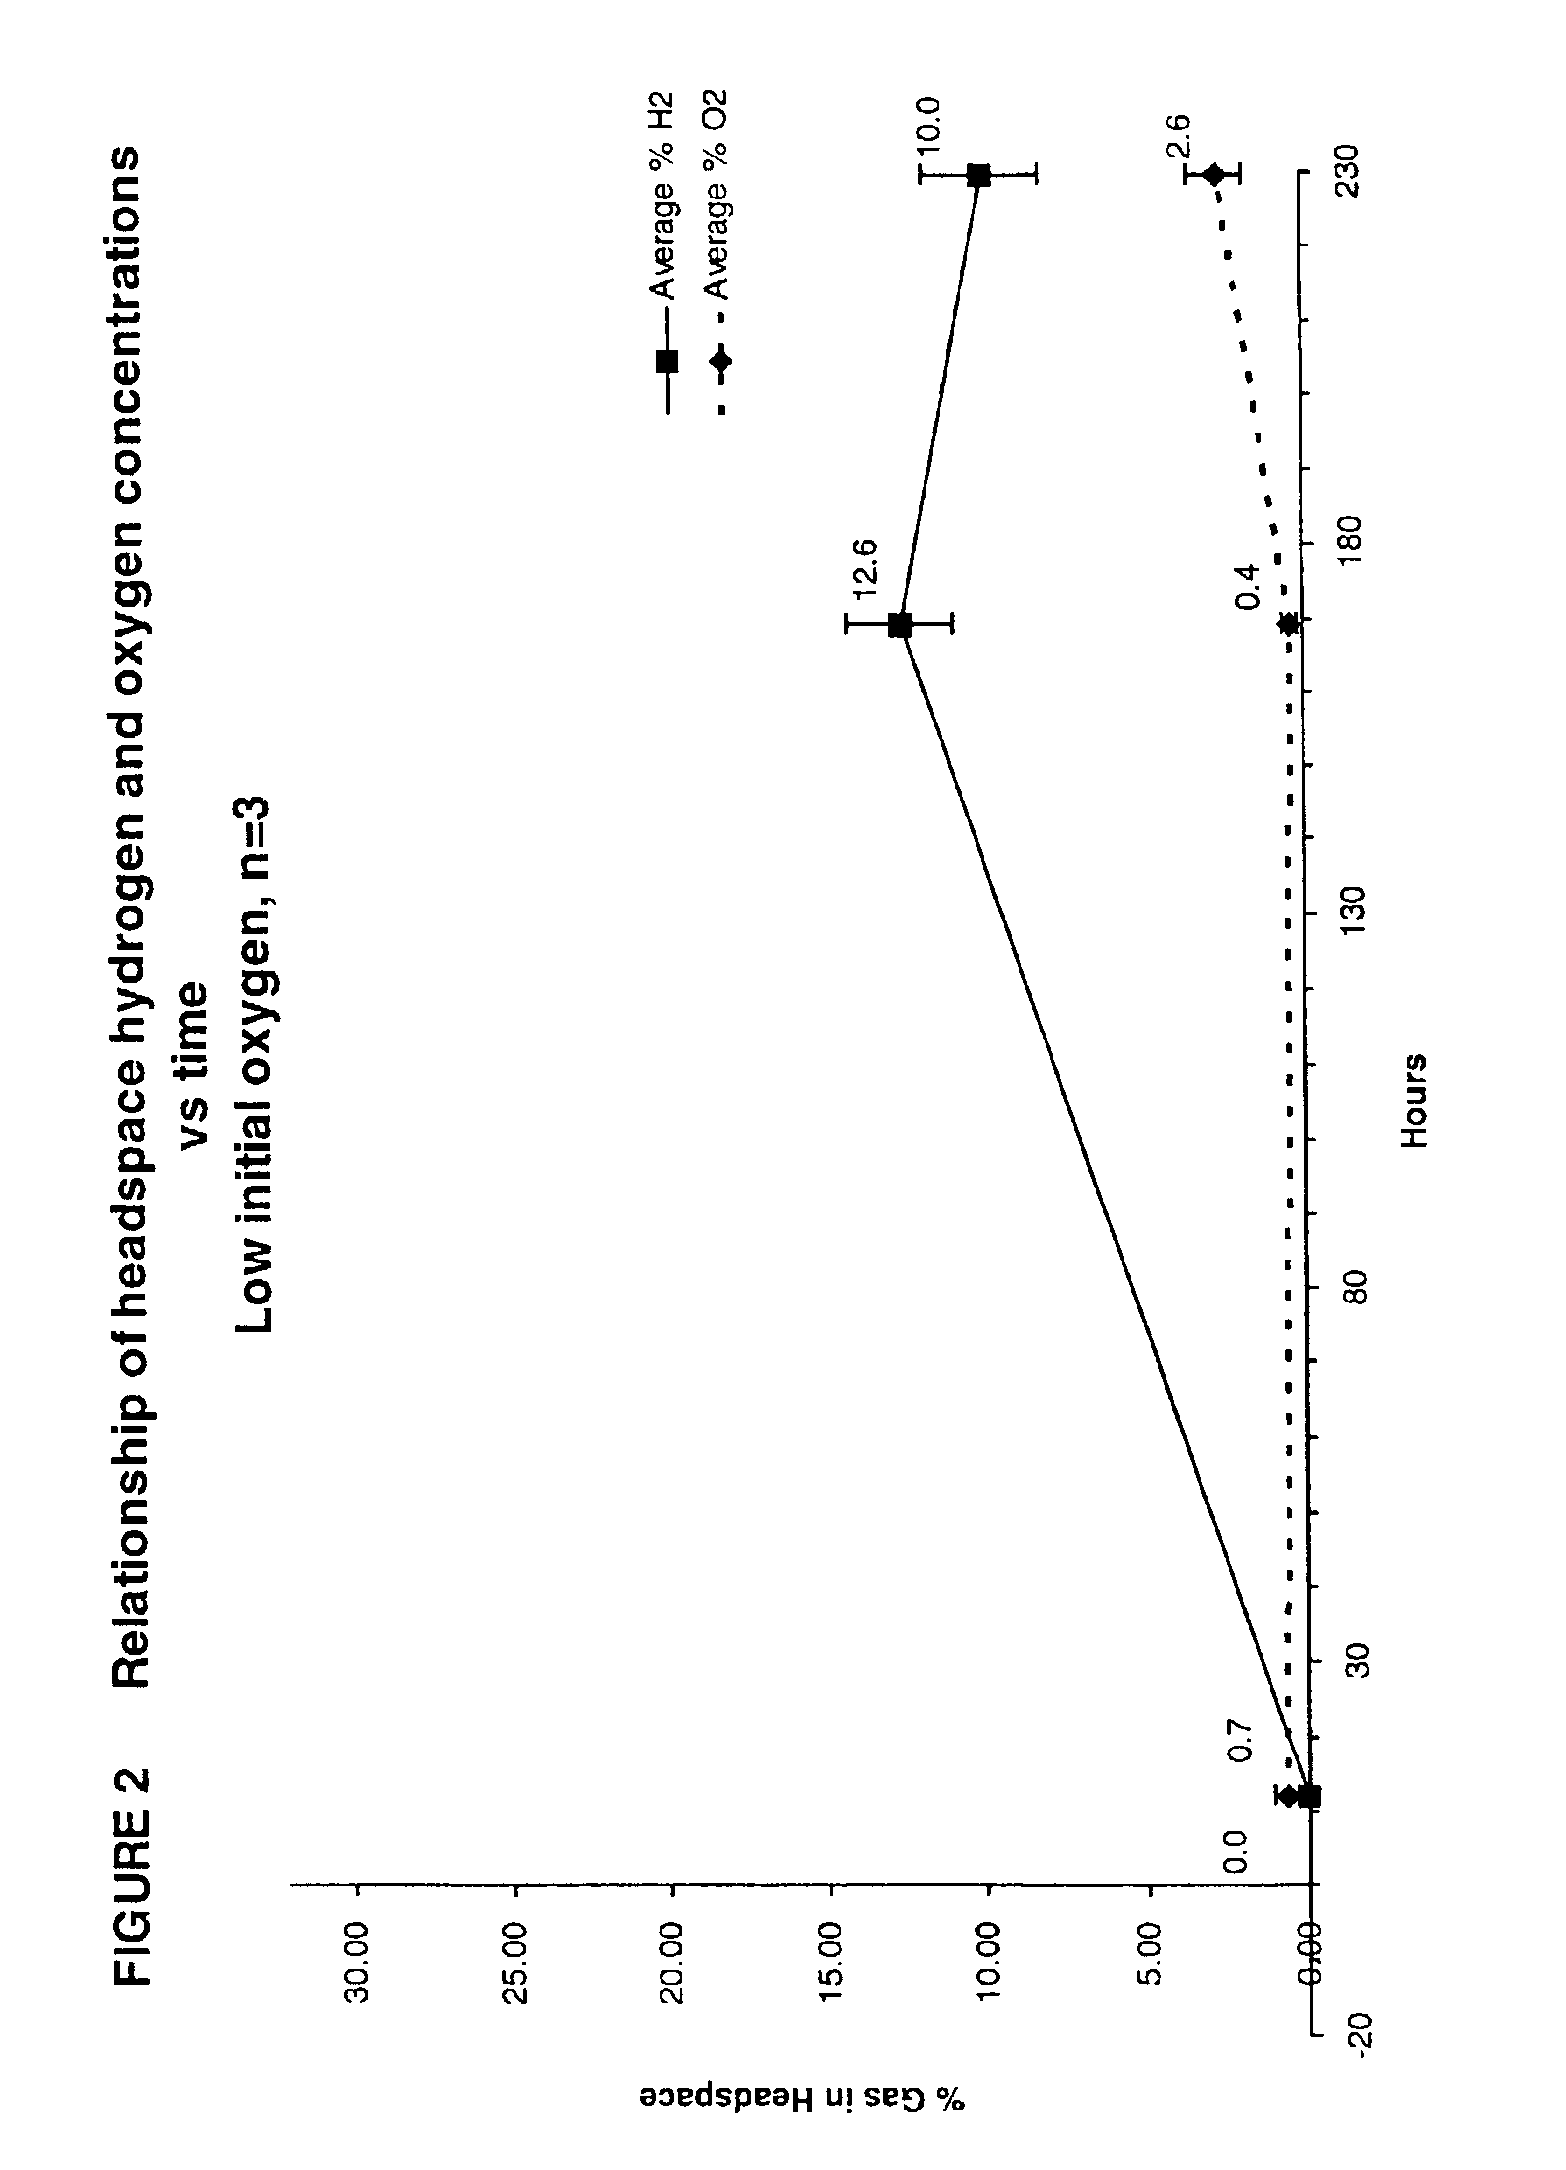 Process for generation of hydrogen gas from various feedstocks using thermophilic bacteria